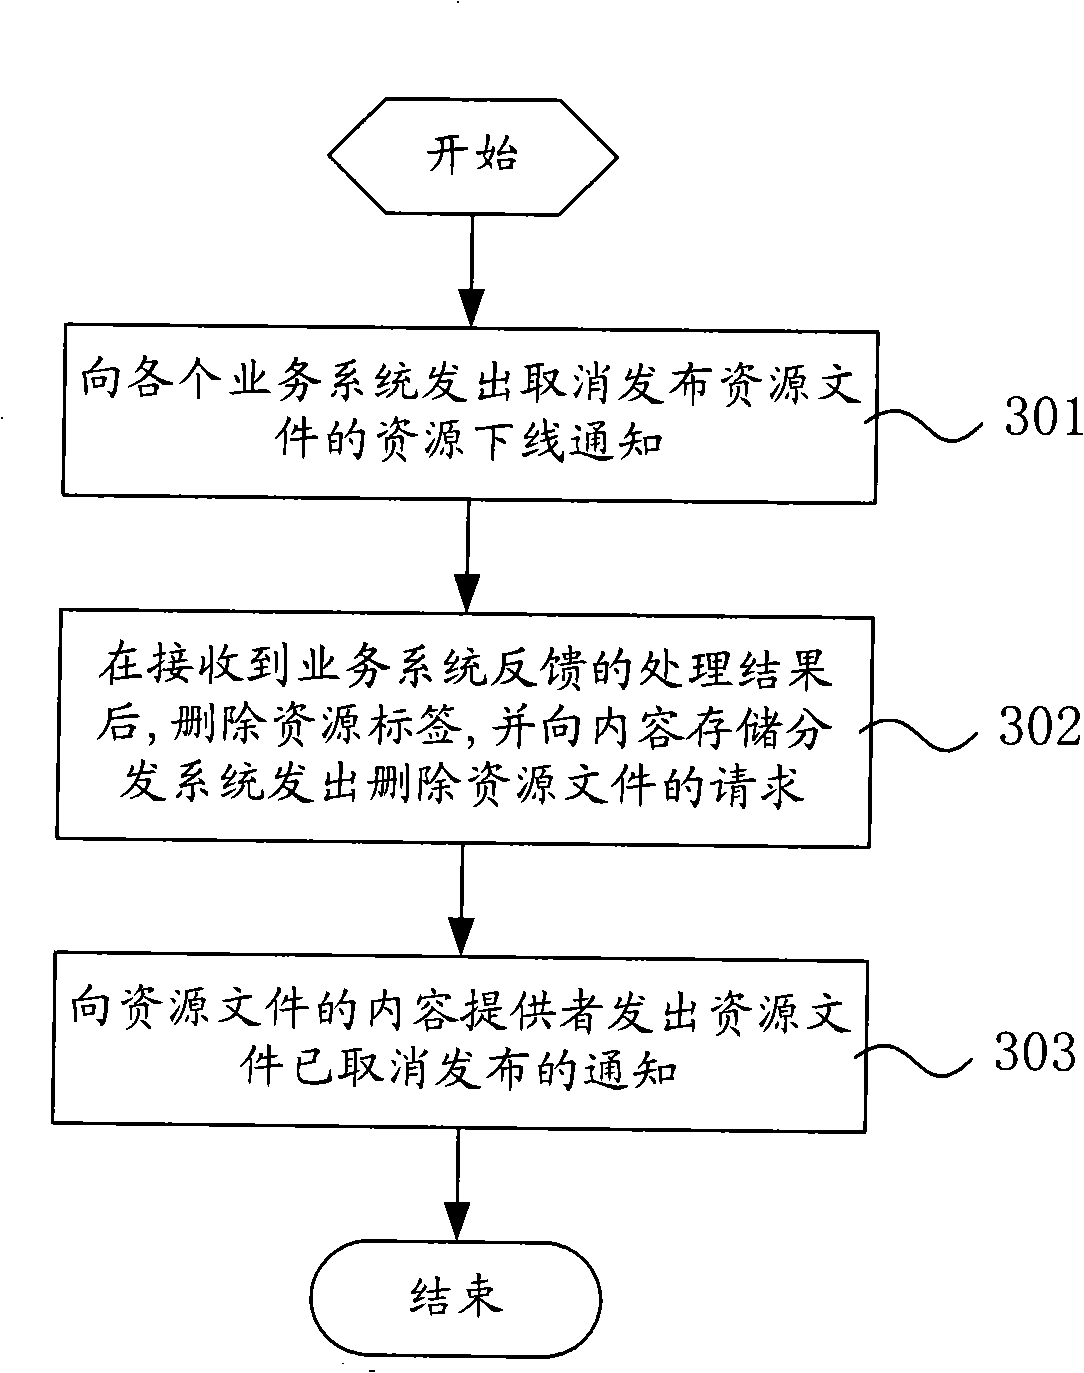 Method and system for unified network resource management